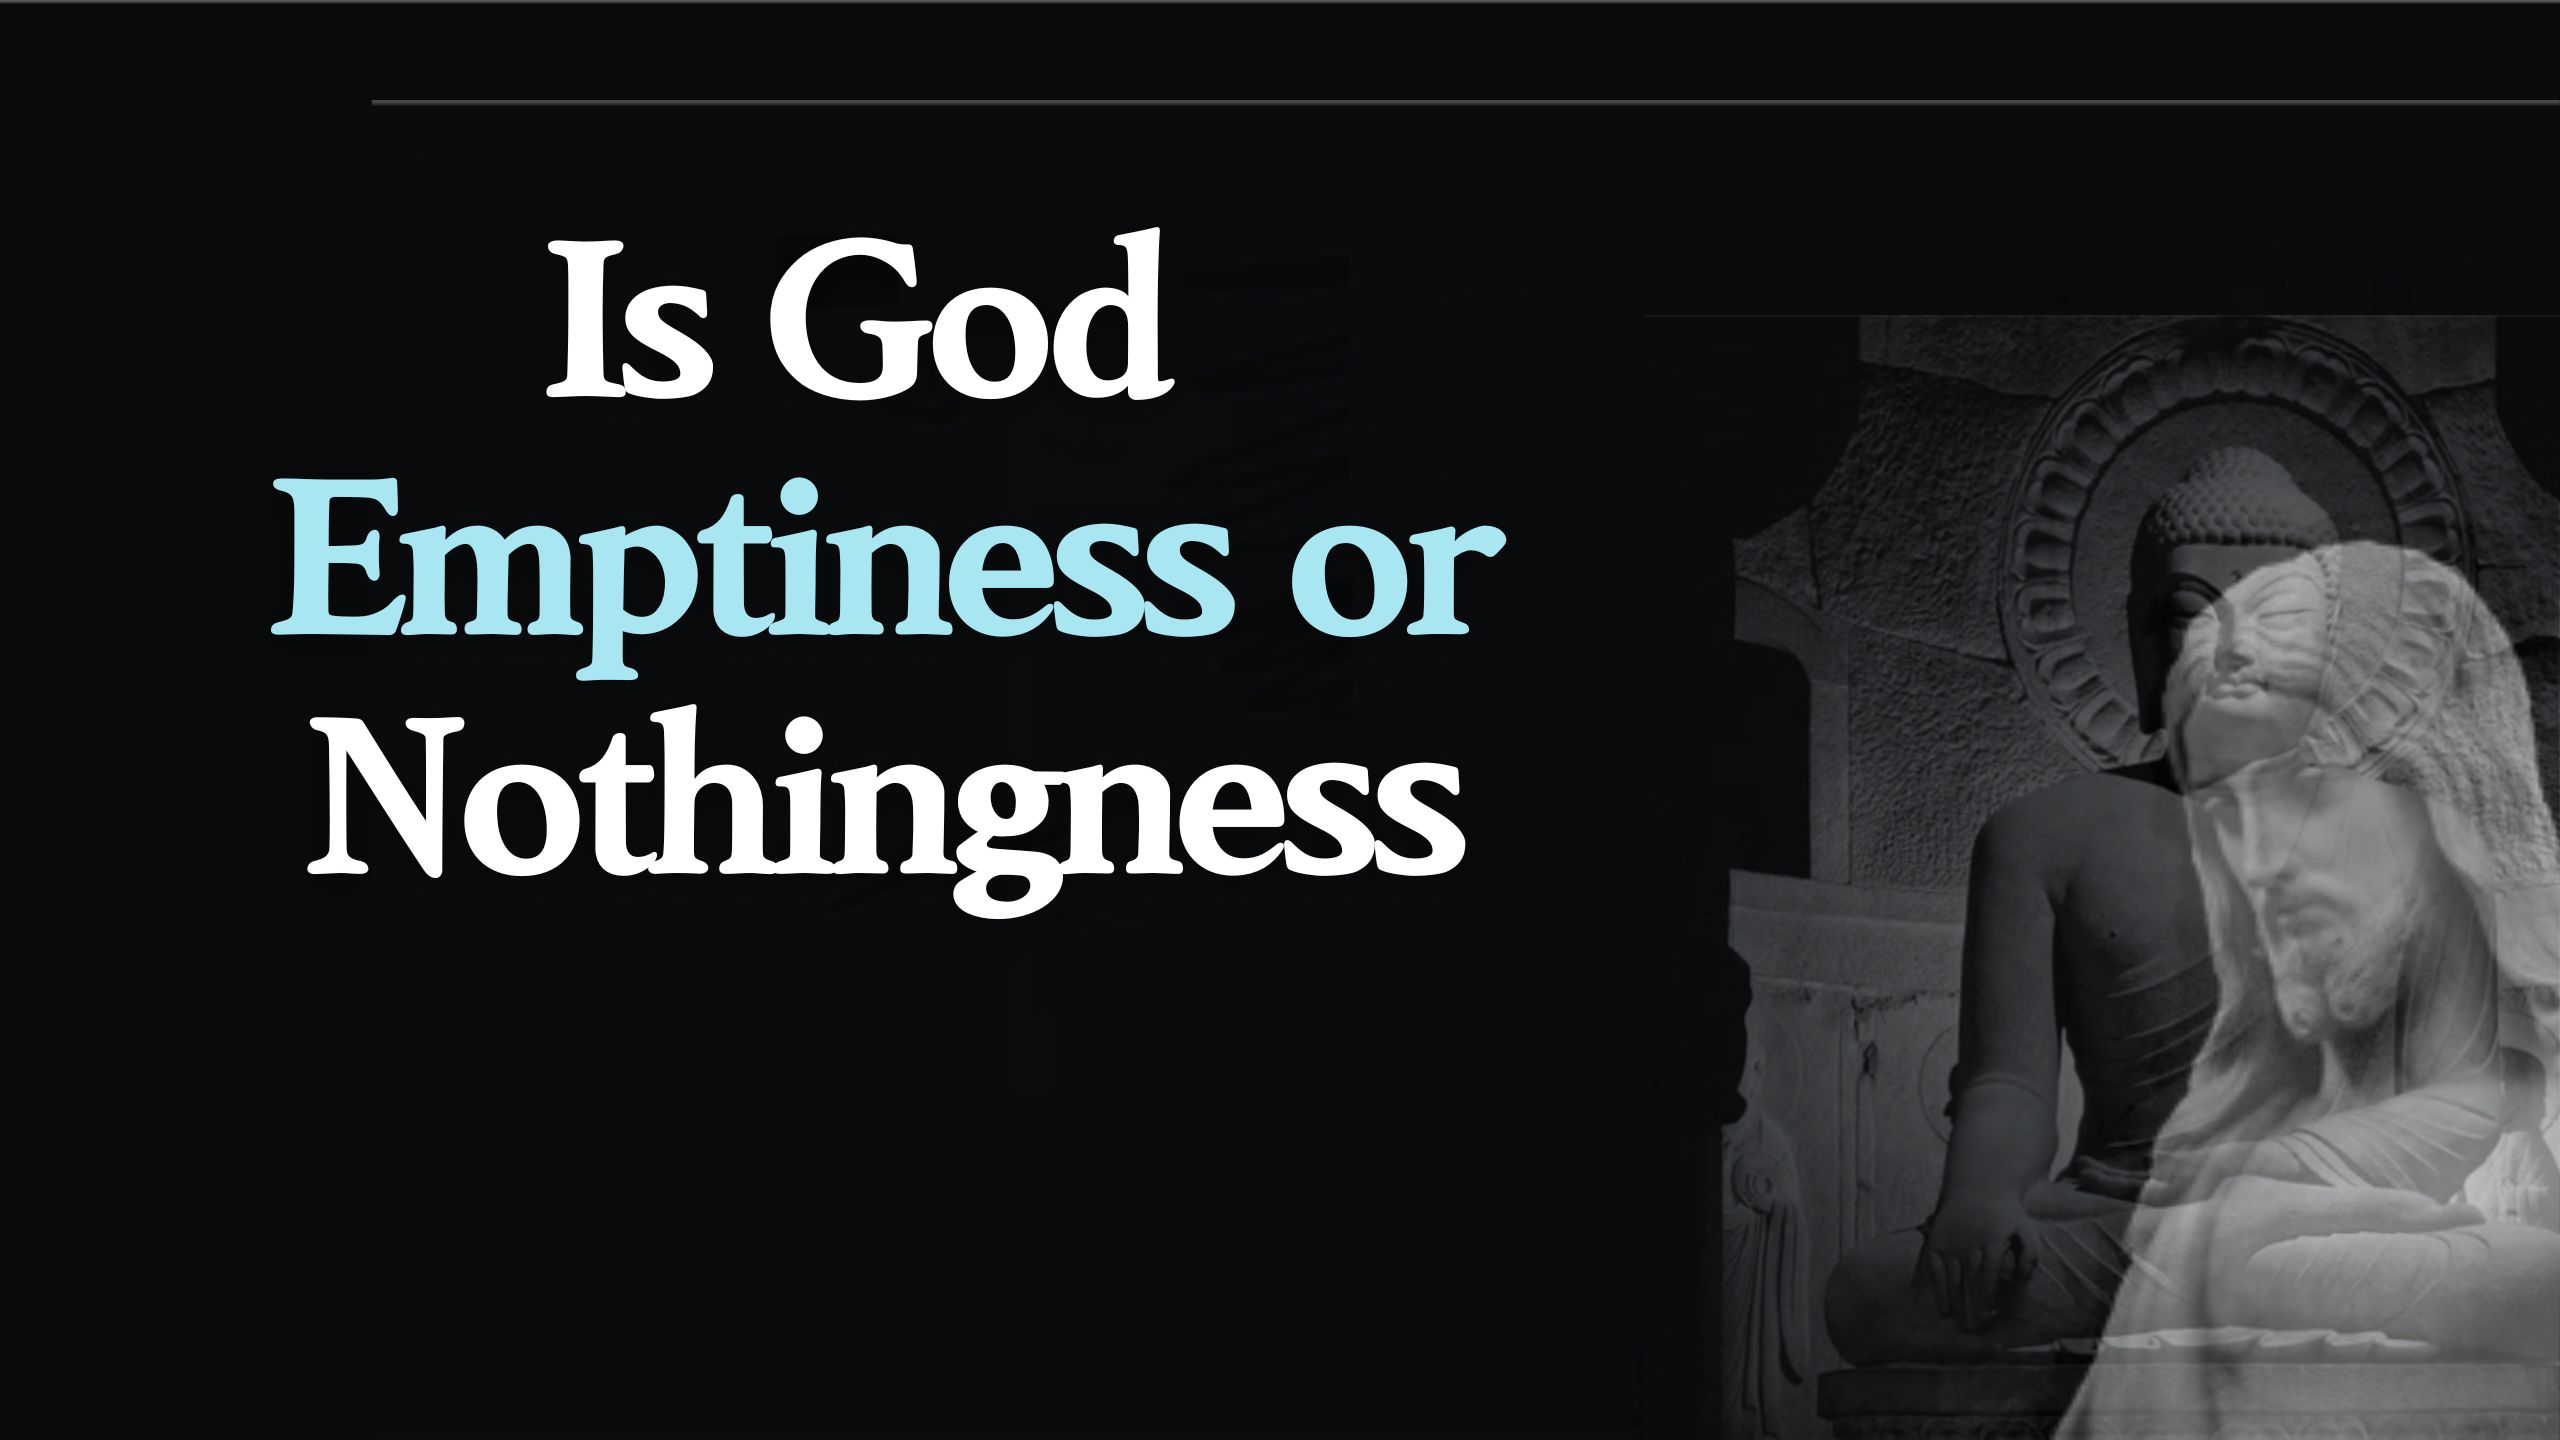 Is God emptiness or nothingness